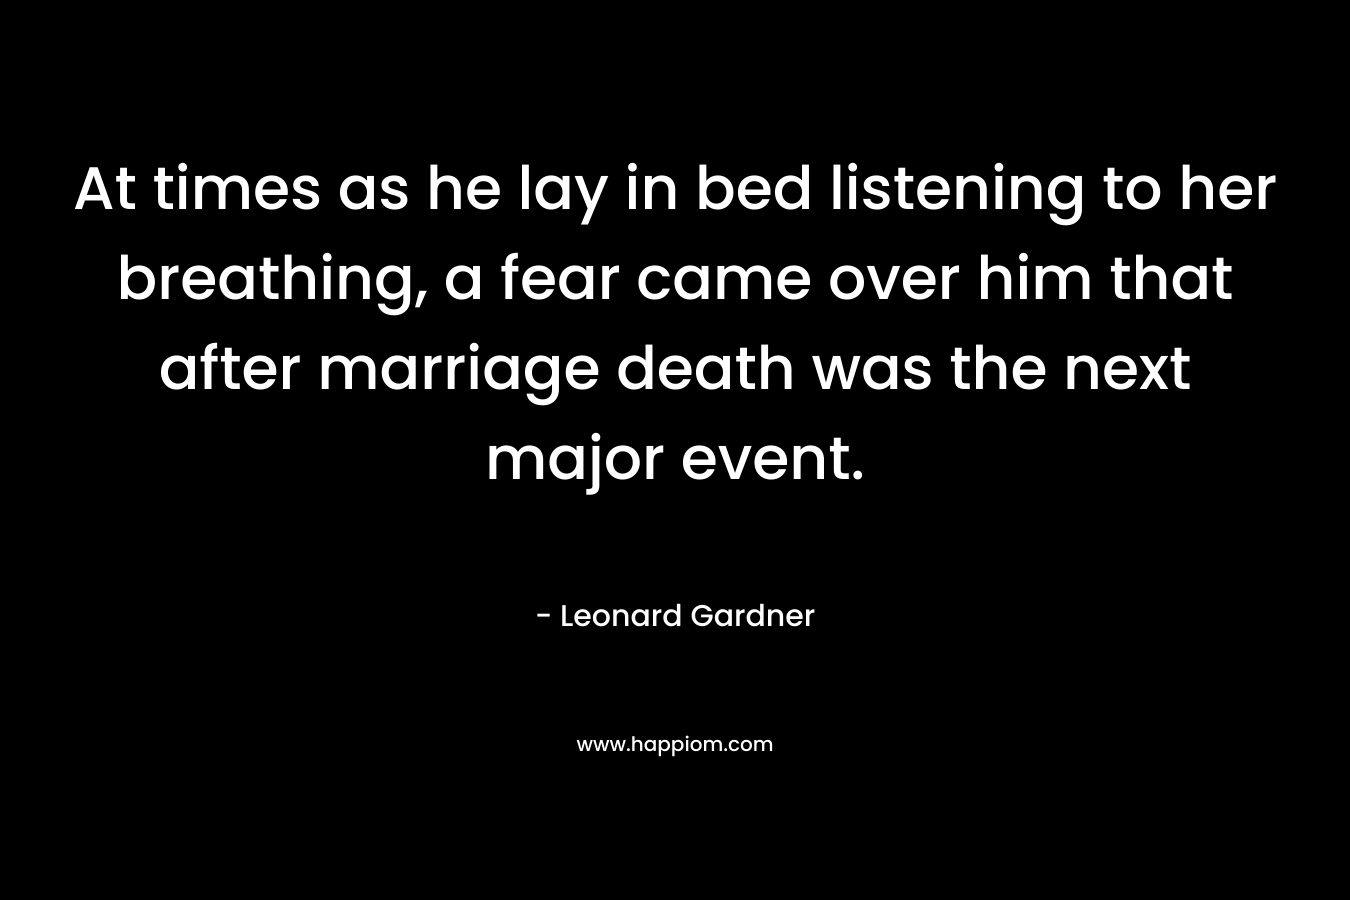 At times as he lay in bed listening to her breathing, a fear came over him that after marriage death was the next major event. – Leonard Gardner